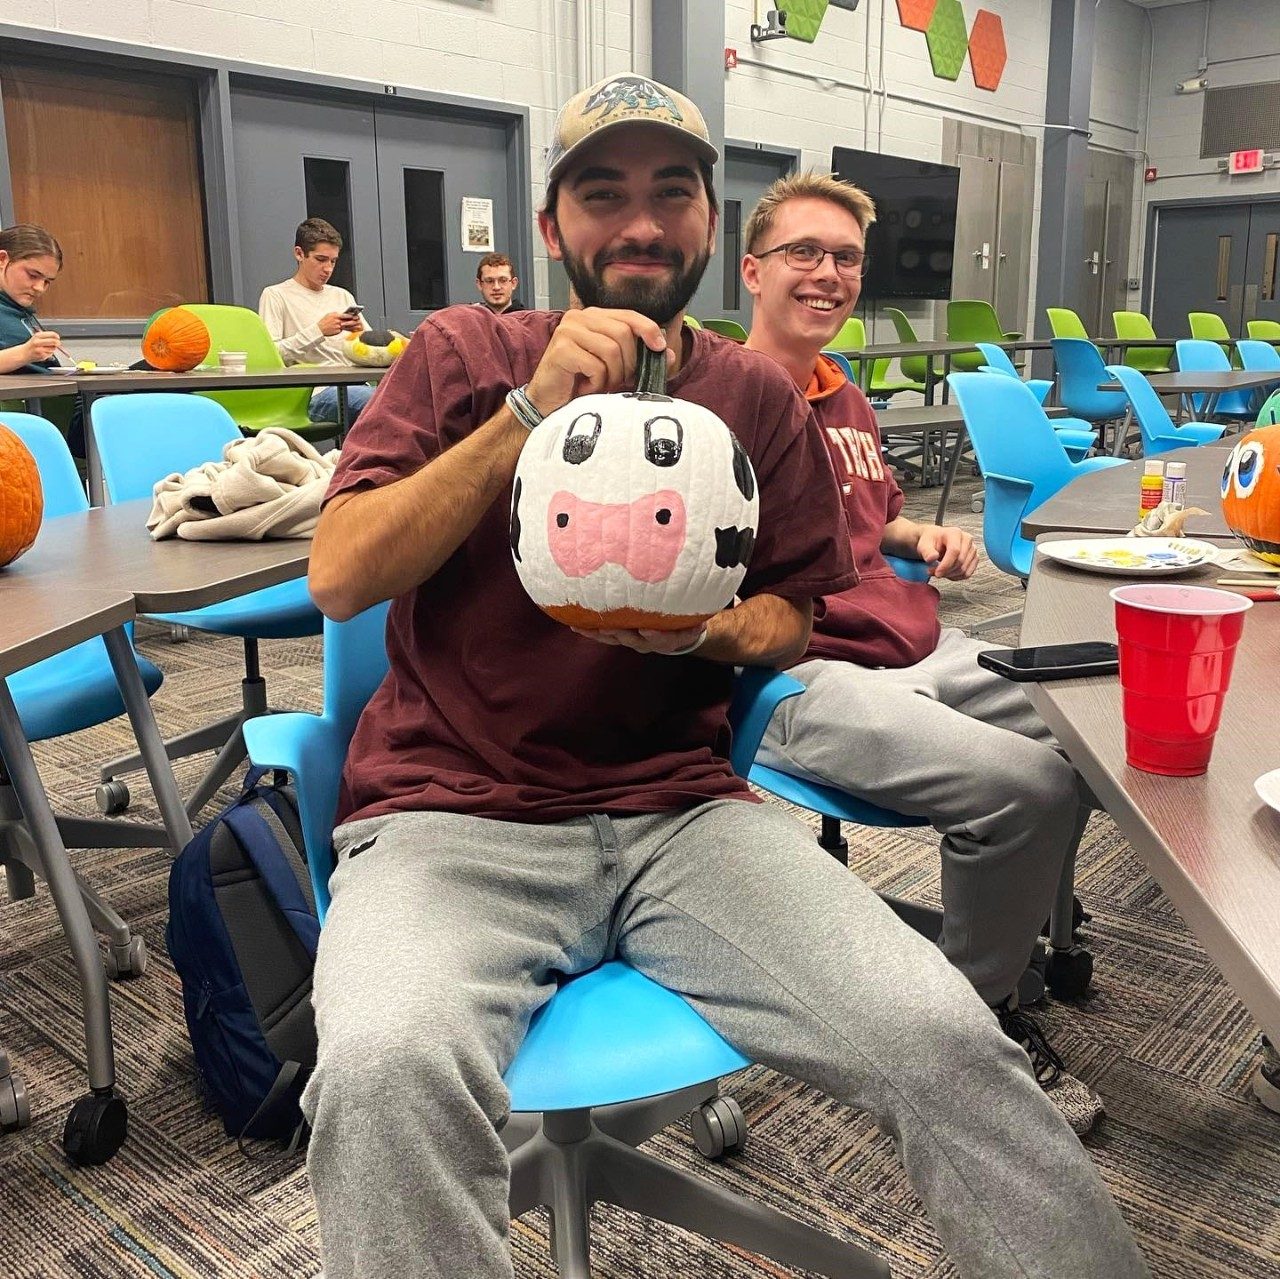 A student holds up a pumpkin painted to look like a cow's face.